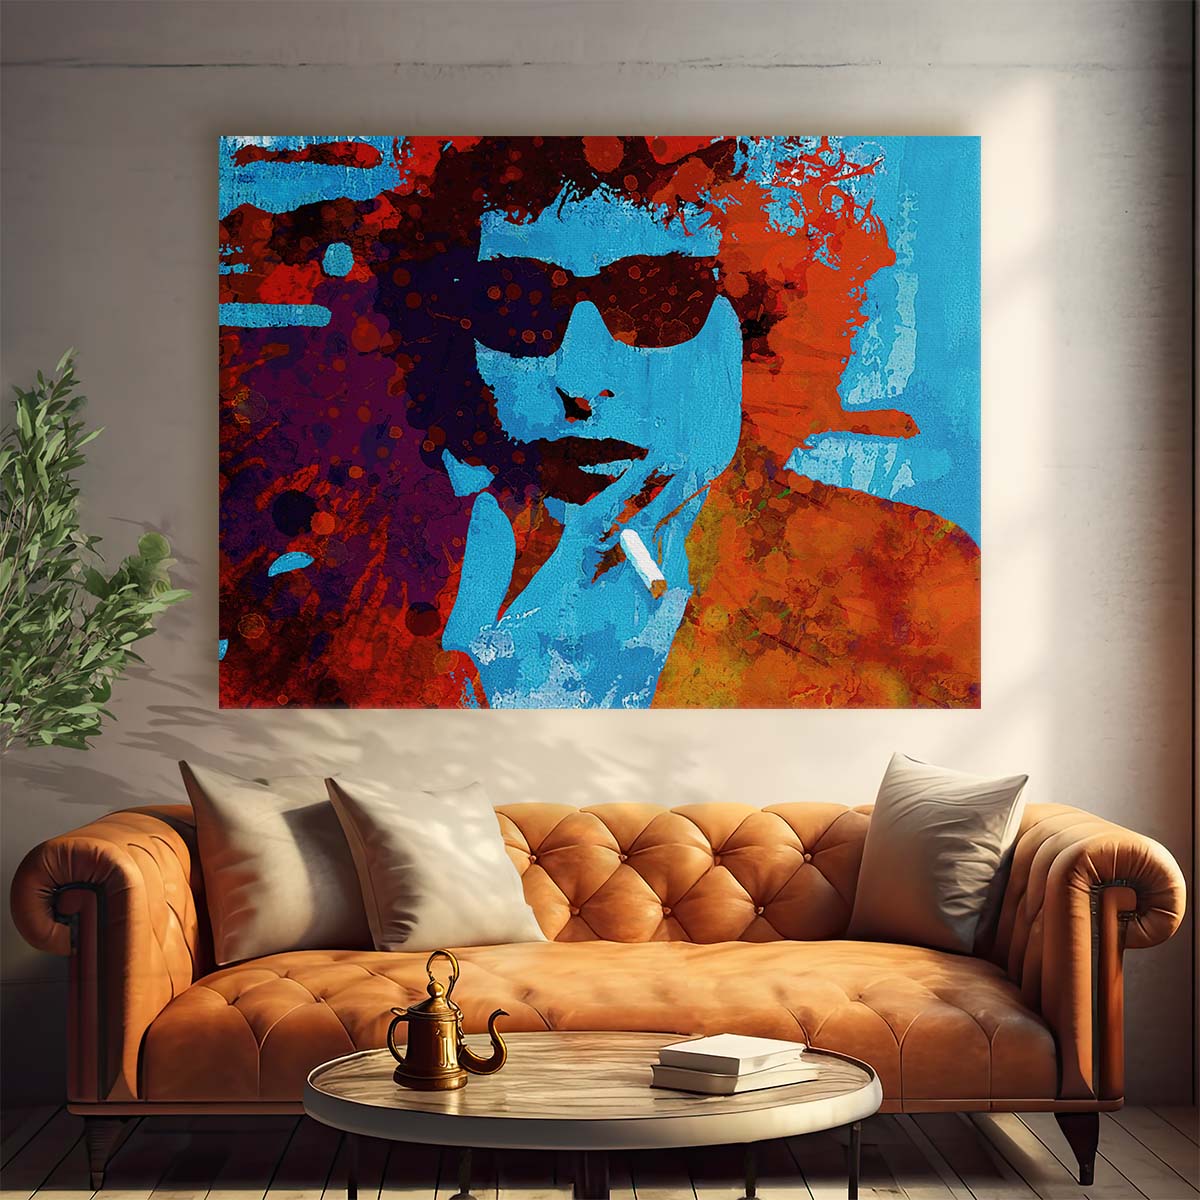 Bob Dylan Portrait Wall Art by Luxuriance Designs. Made in USA.